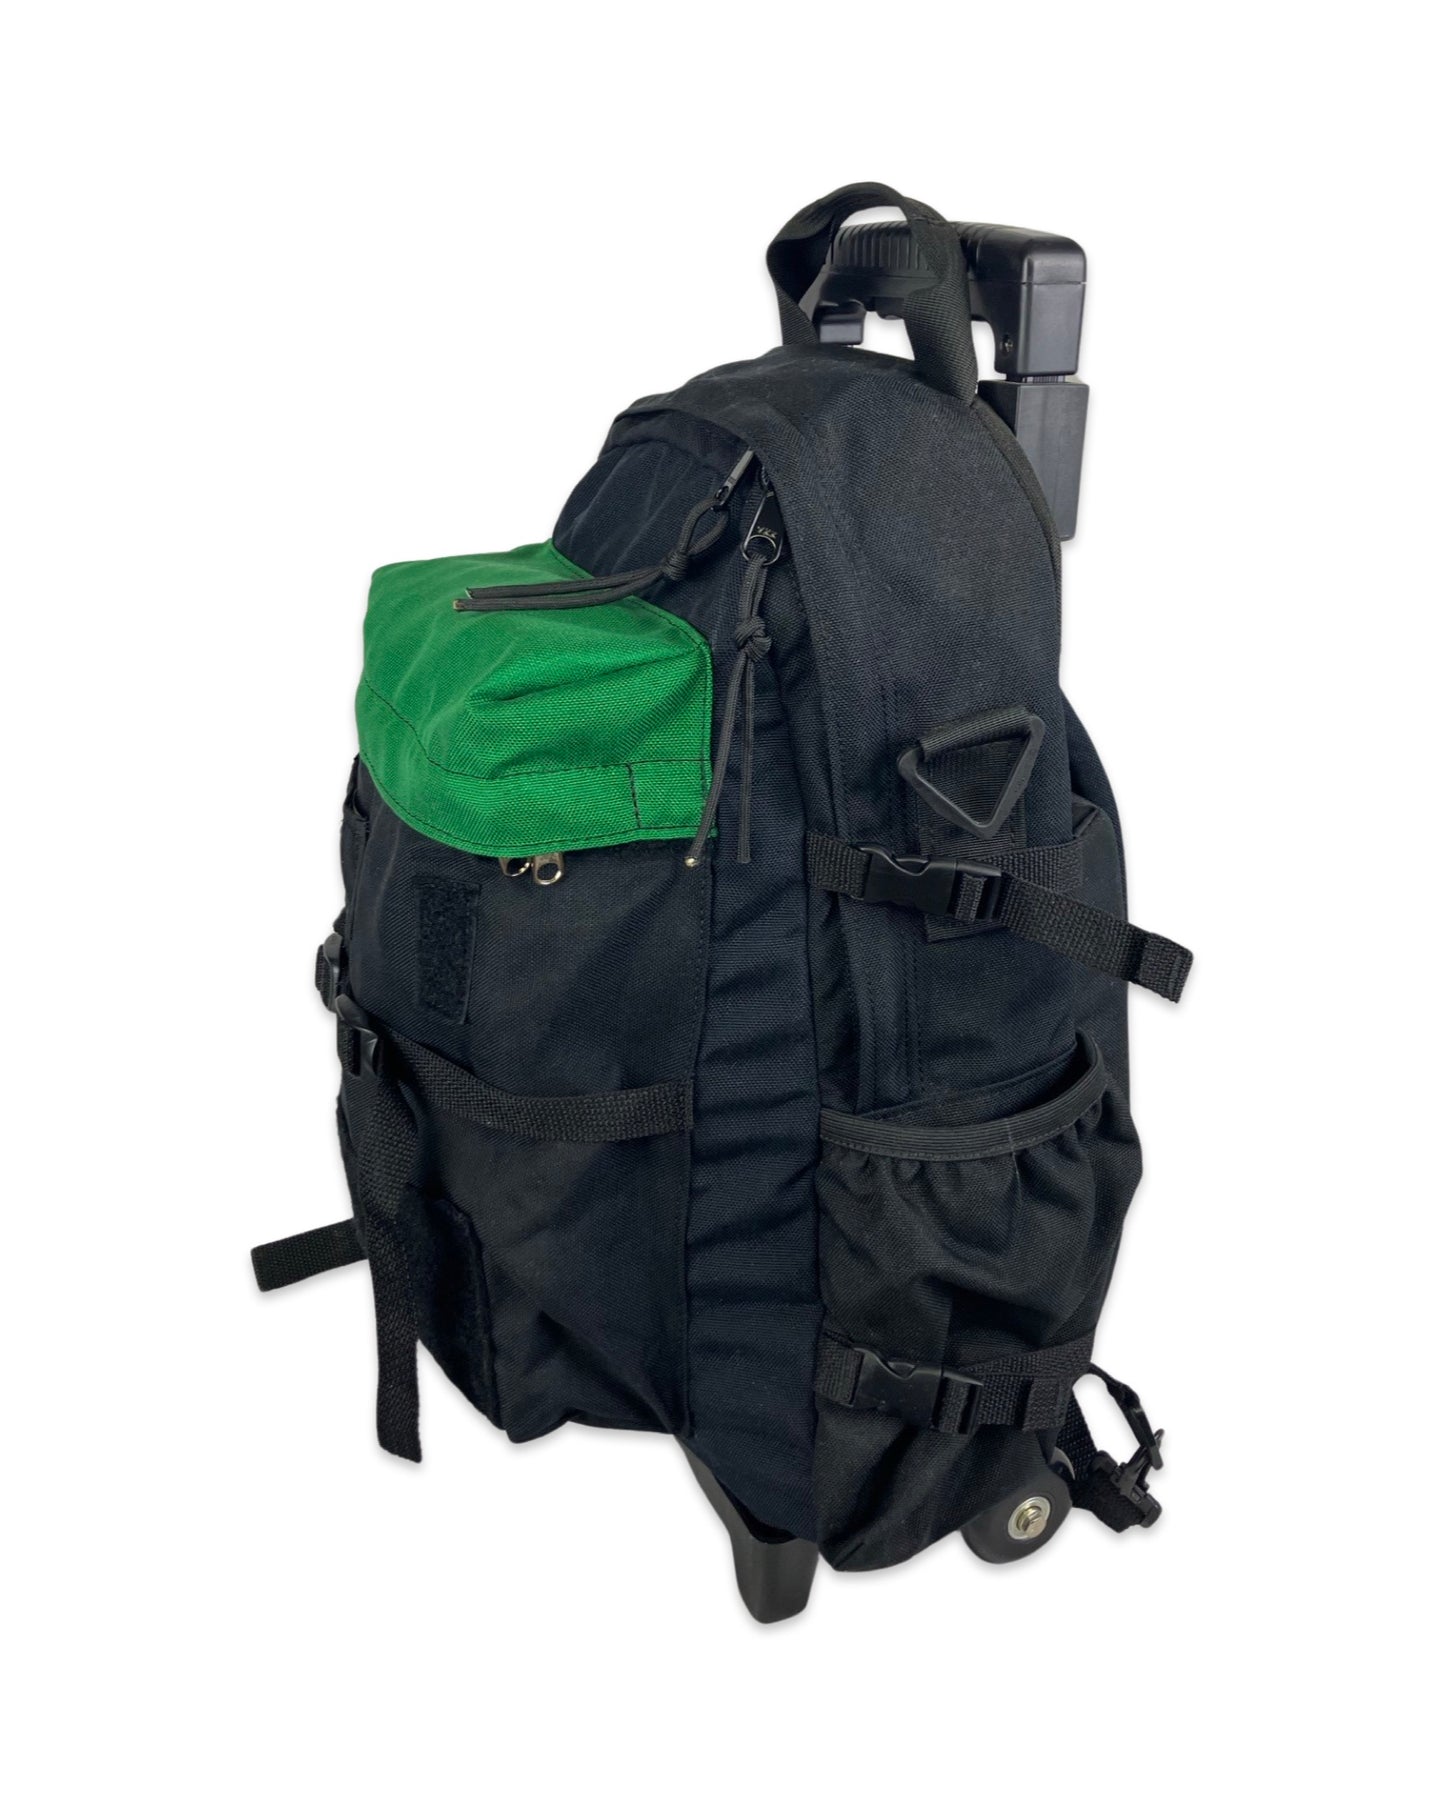 TIMBER Rolling Pack Wheeled Bags, by Tough Traveler. Made in USA since 1970